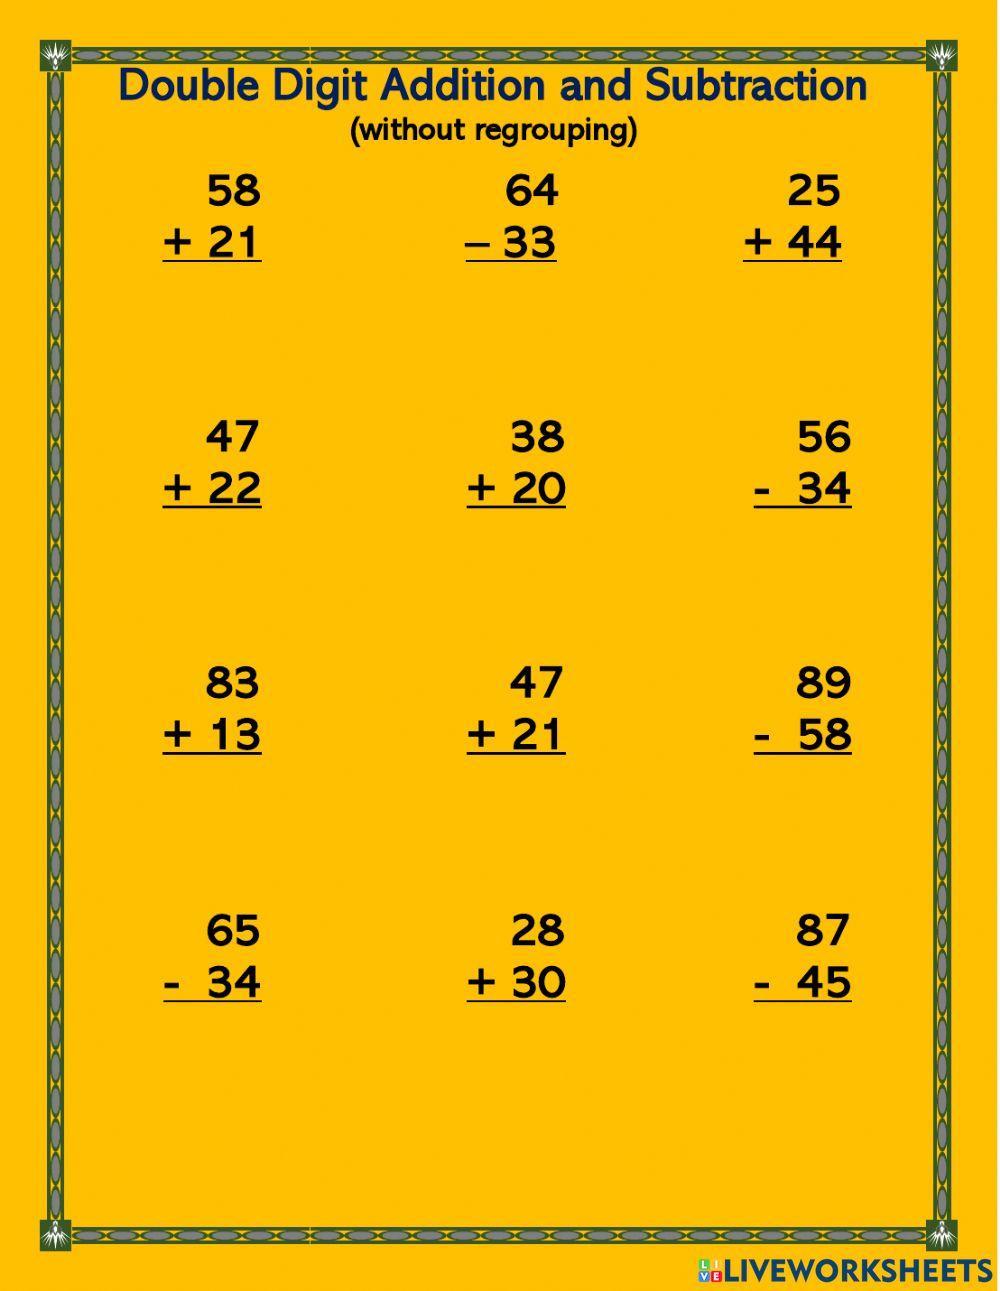 Double Digit Addition and Subtraction Set 6 without regrouping